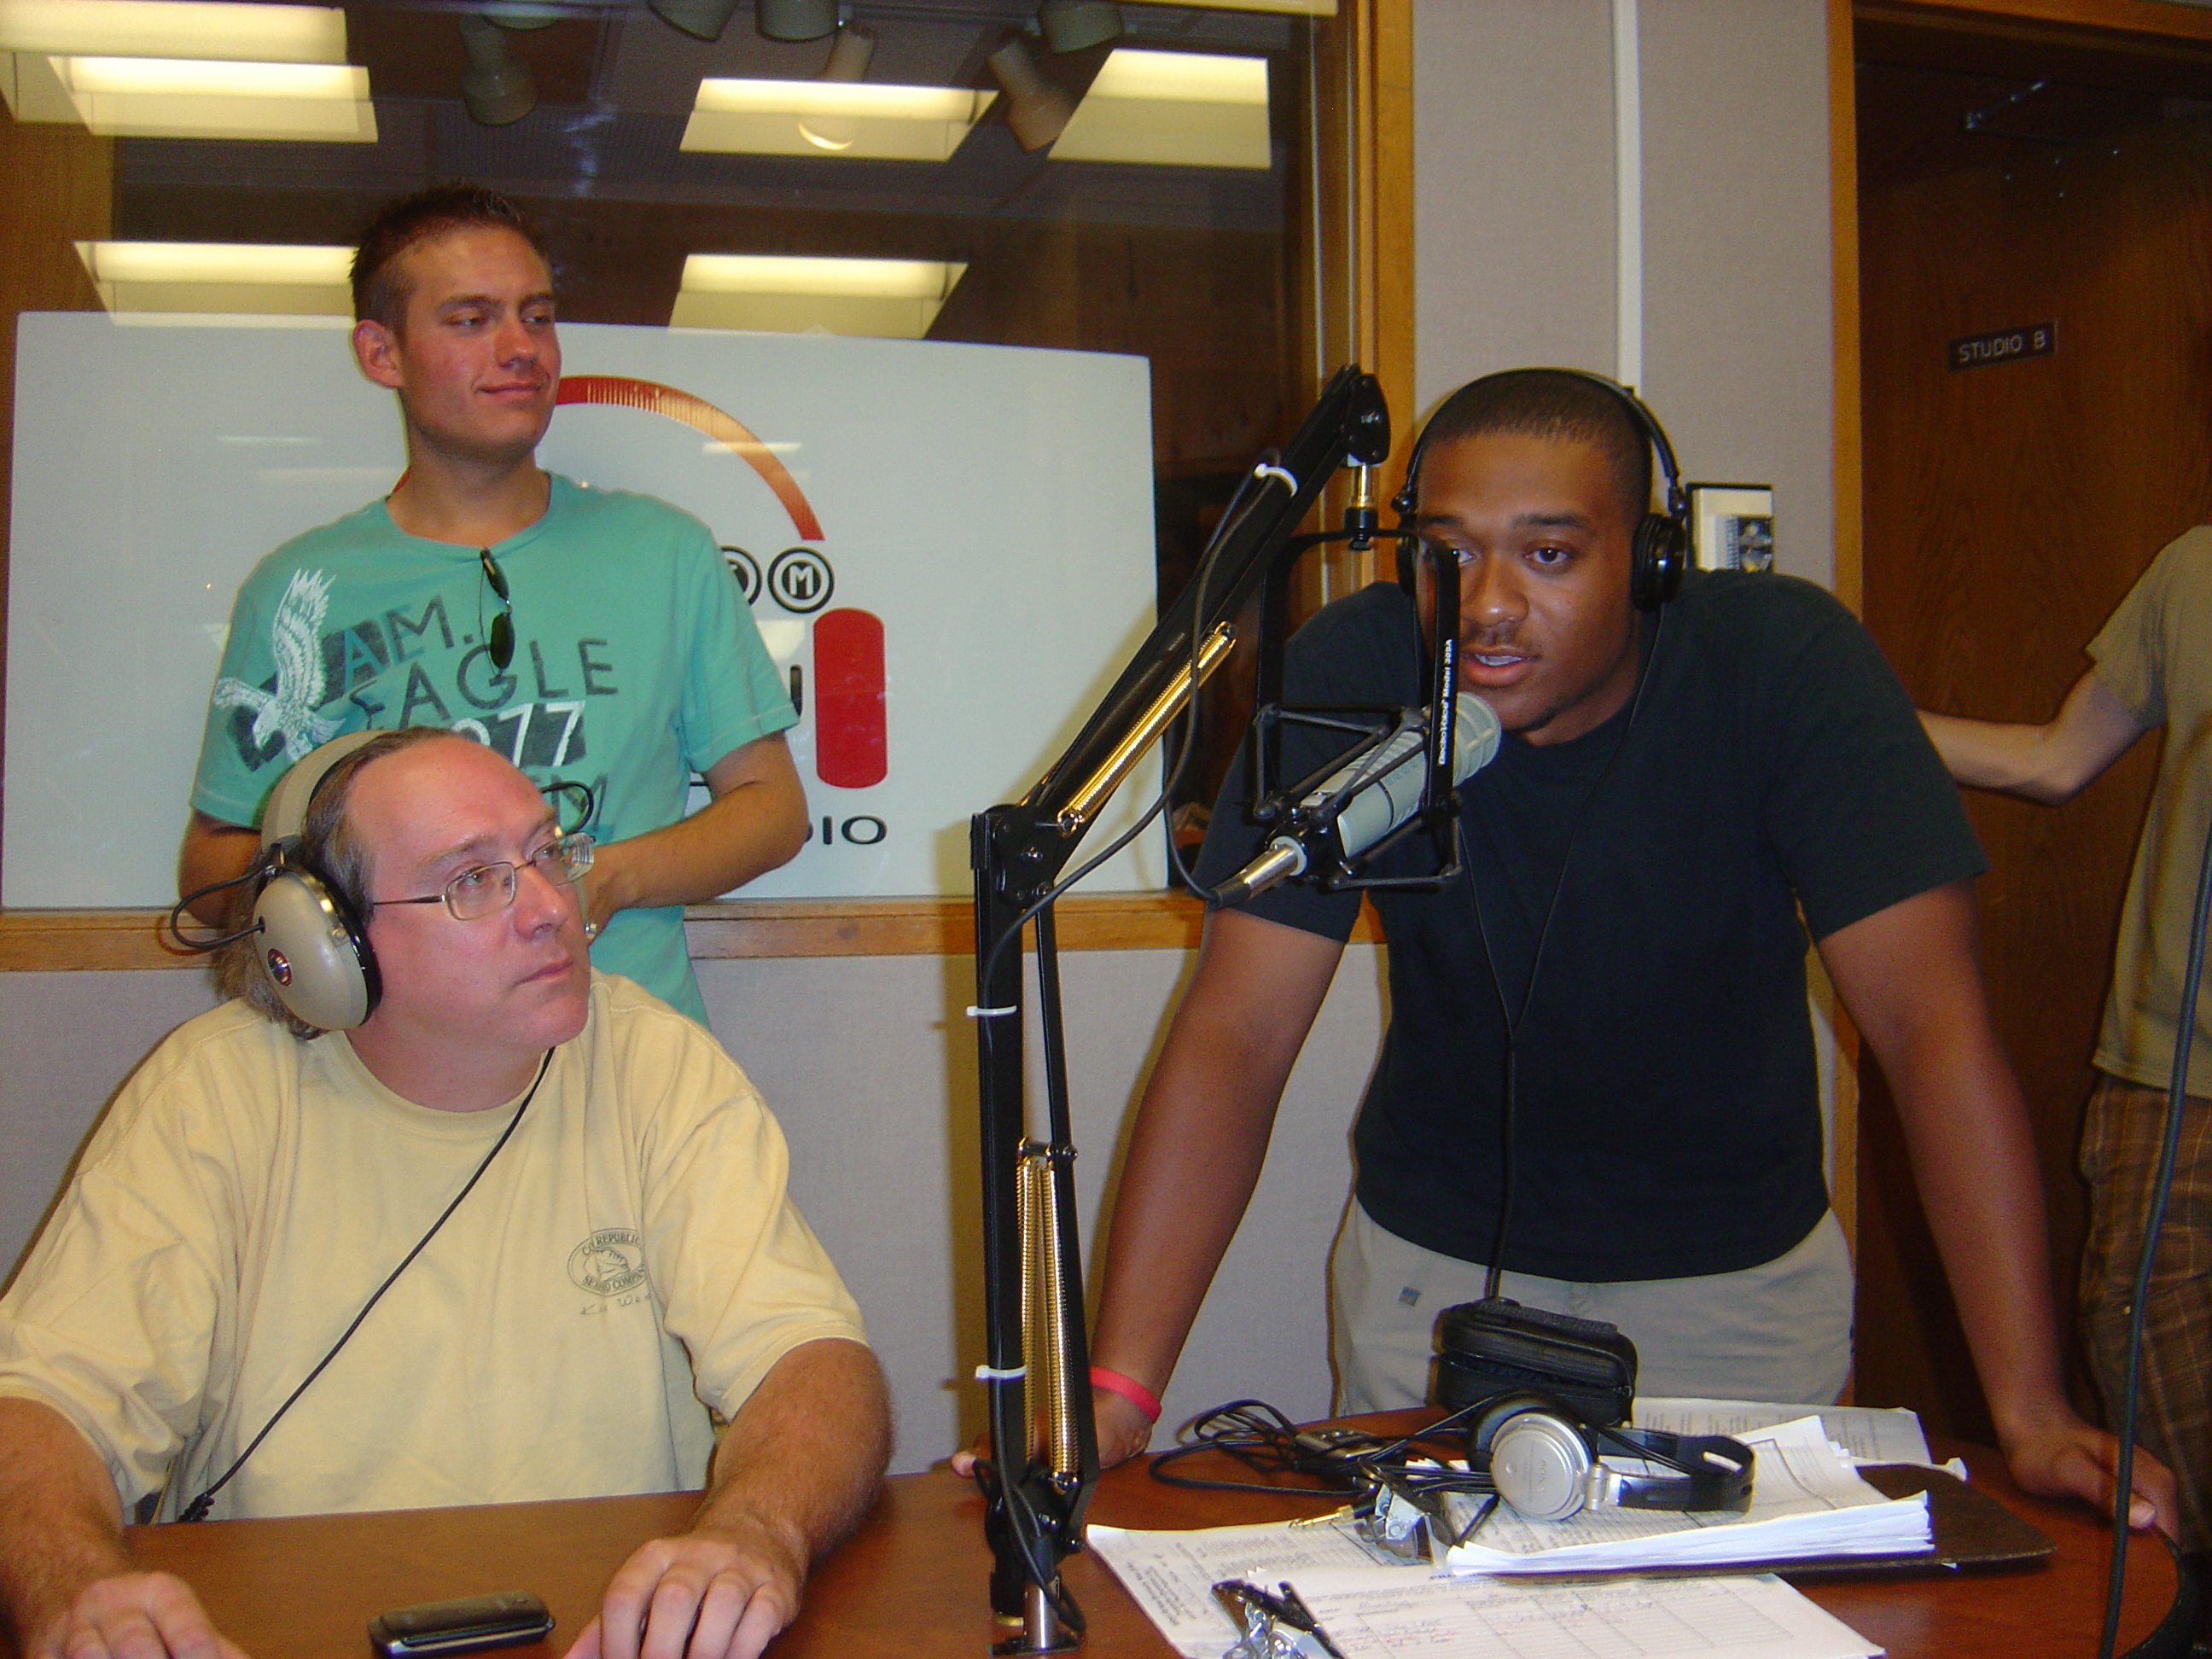 The First Broadcast from the Rebuilt FM Control 2009